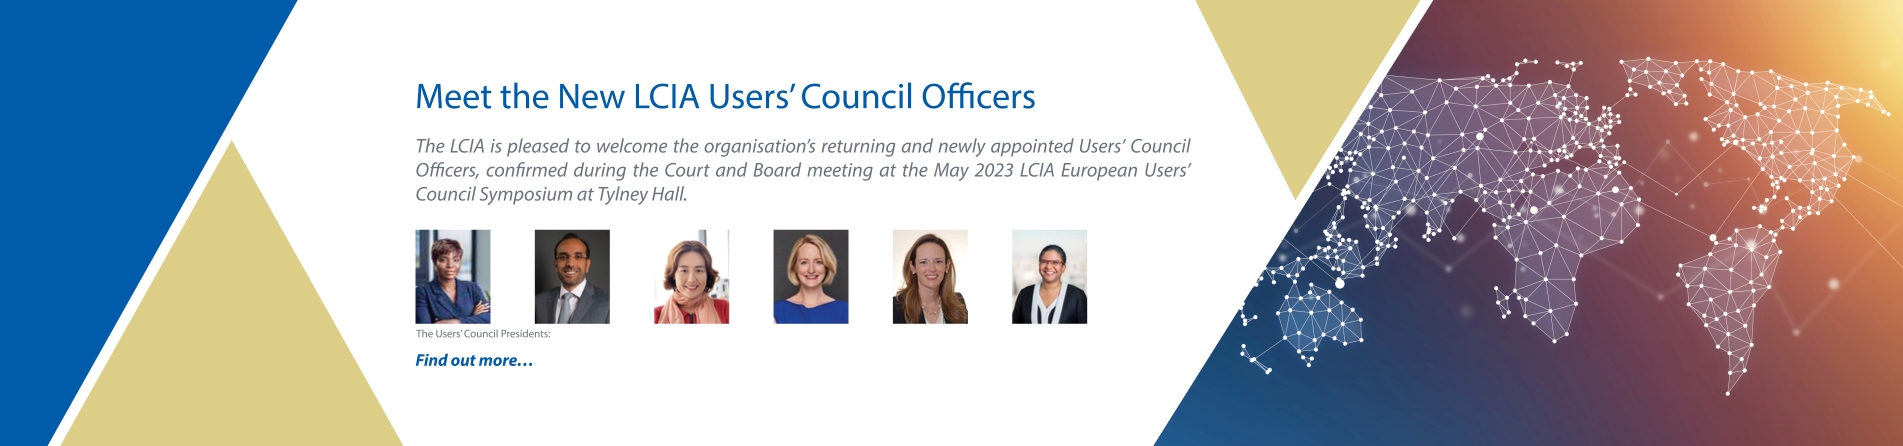 Meet the new LCIA Users' Council Officers